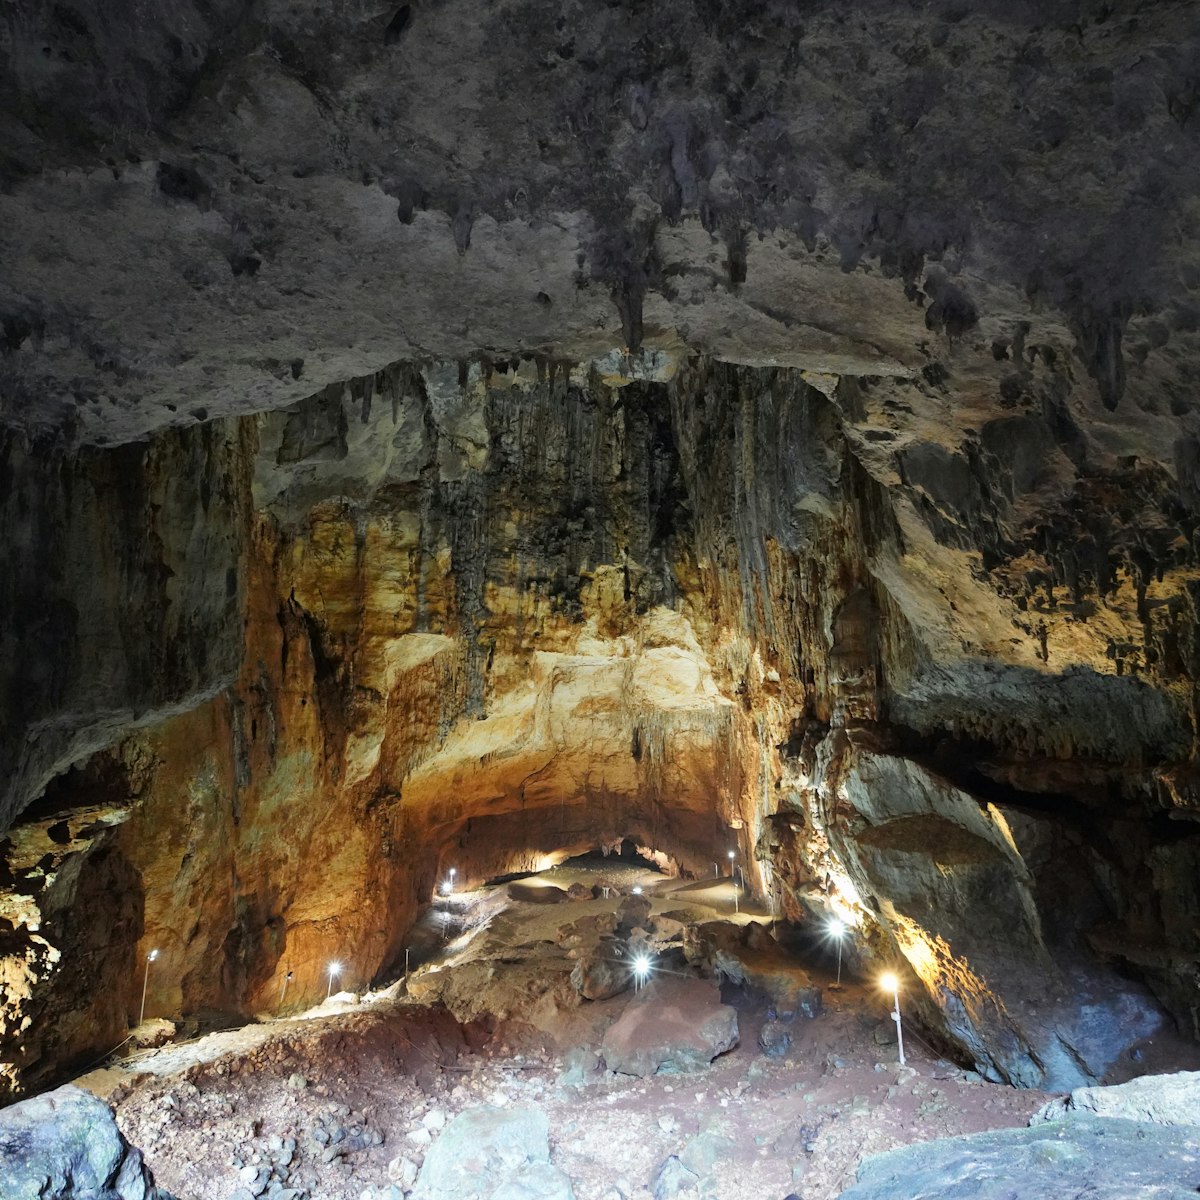 Cave of Heaven and Hell in Mersin, Turkey. Cennet and Cehennem or heaven and hell are two large sinkholes in Taurus Mountains. ; Shutterstock ID 1554068366; purchase_order: 65050; job: ; client: ; other:
1554068366